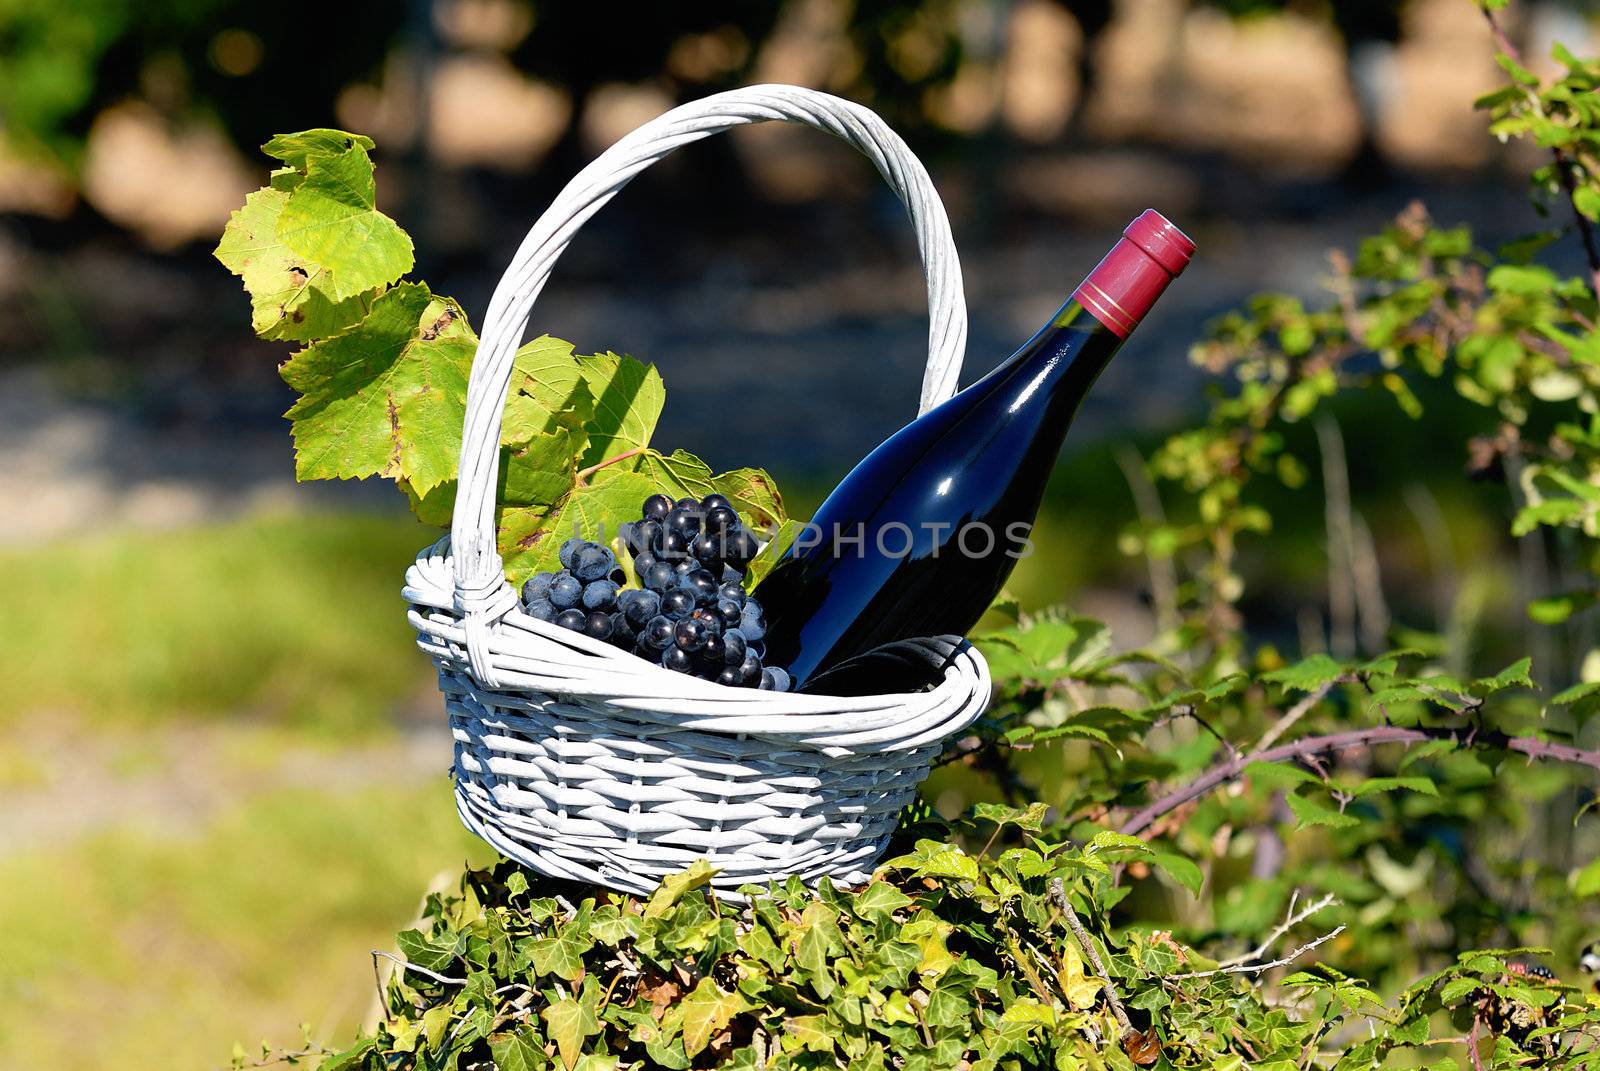 Bottle of red wine in a basket of reasons near a typical church